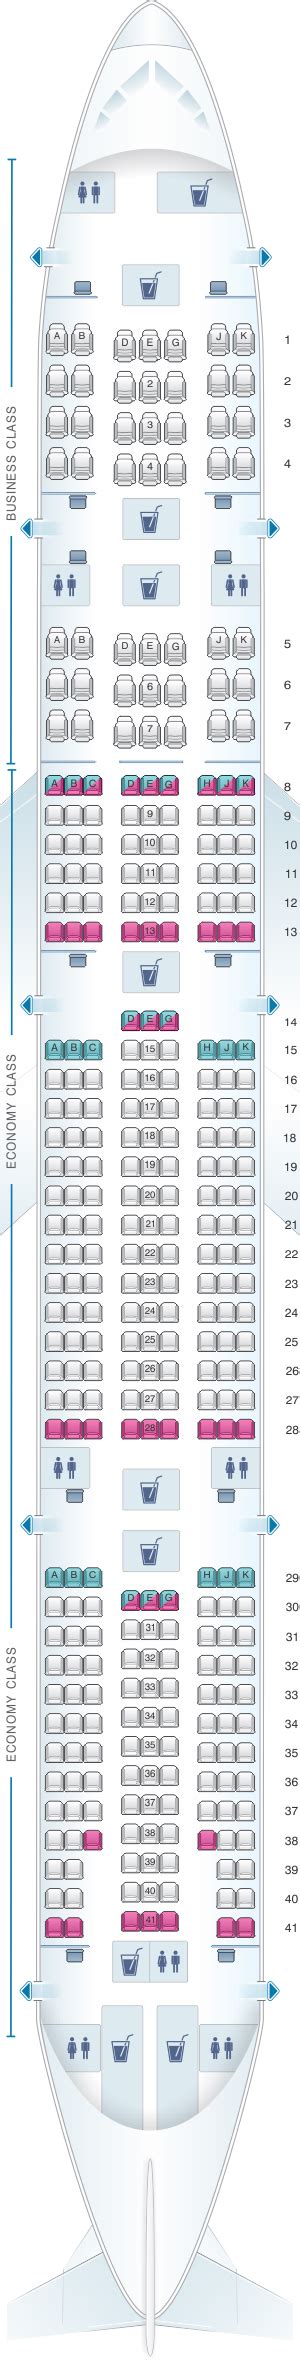 Seating Plan For Boeing Er Jet Free Download Nude Photo Gallery